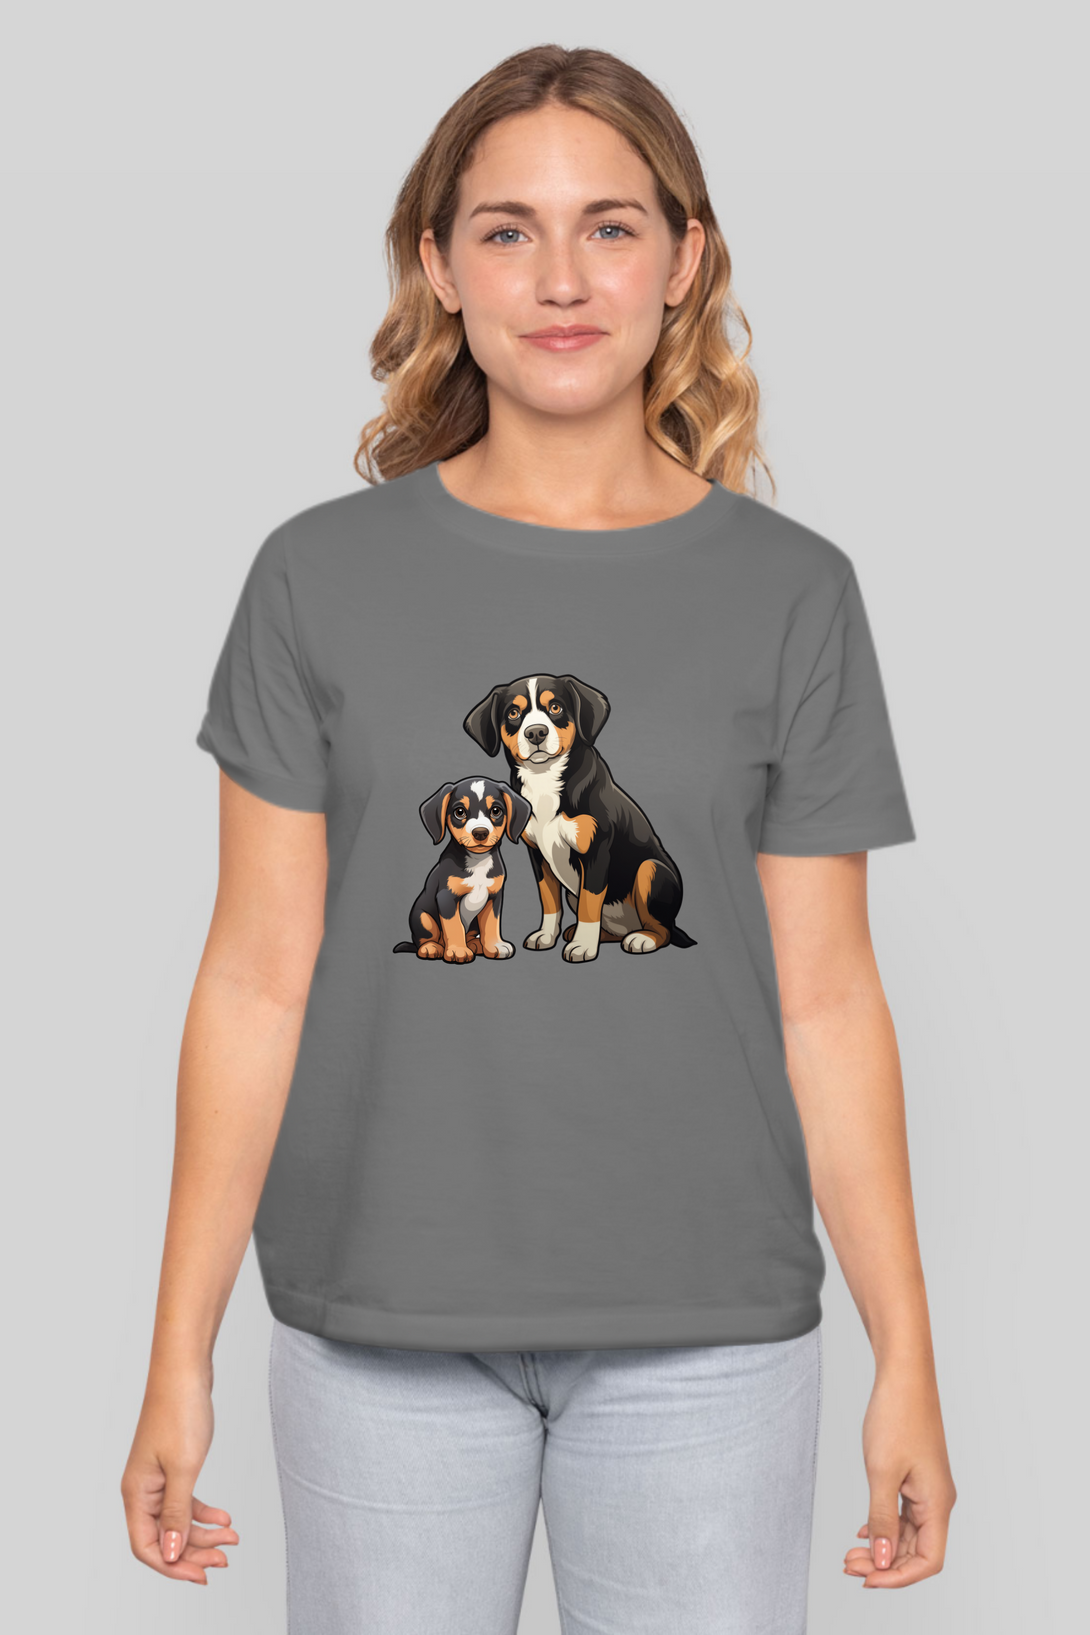 Puppy And Dog Printed T-Shirt For Women - WowWaves - 8